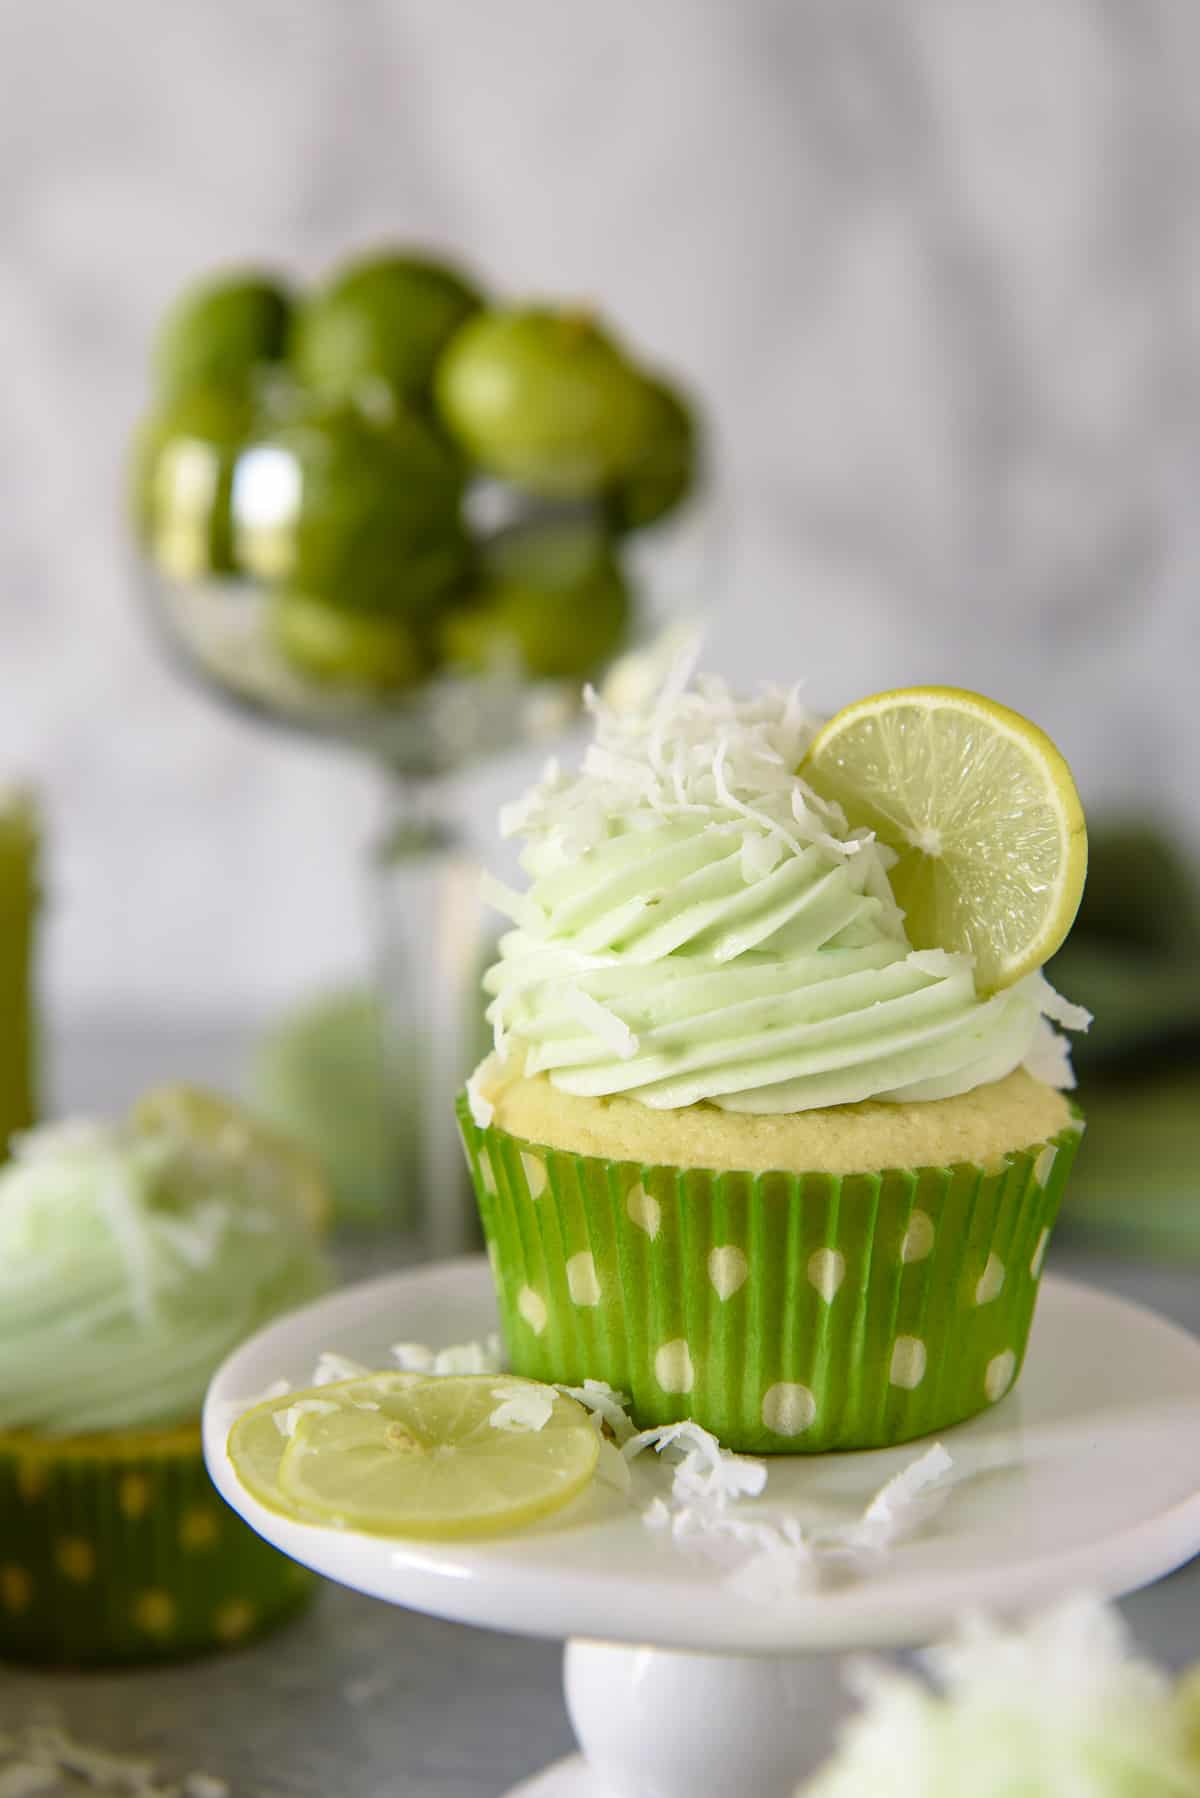 Coconut Lime Cupcakes with Key Lime Curd Filling • The Crumby Kitchen